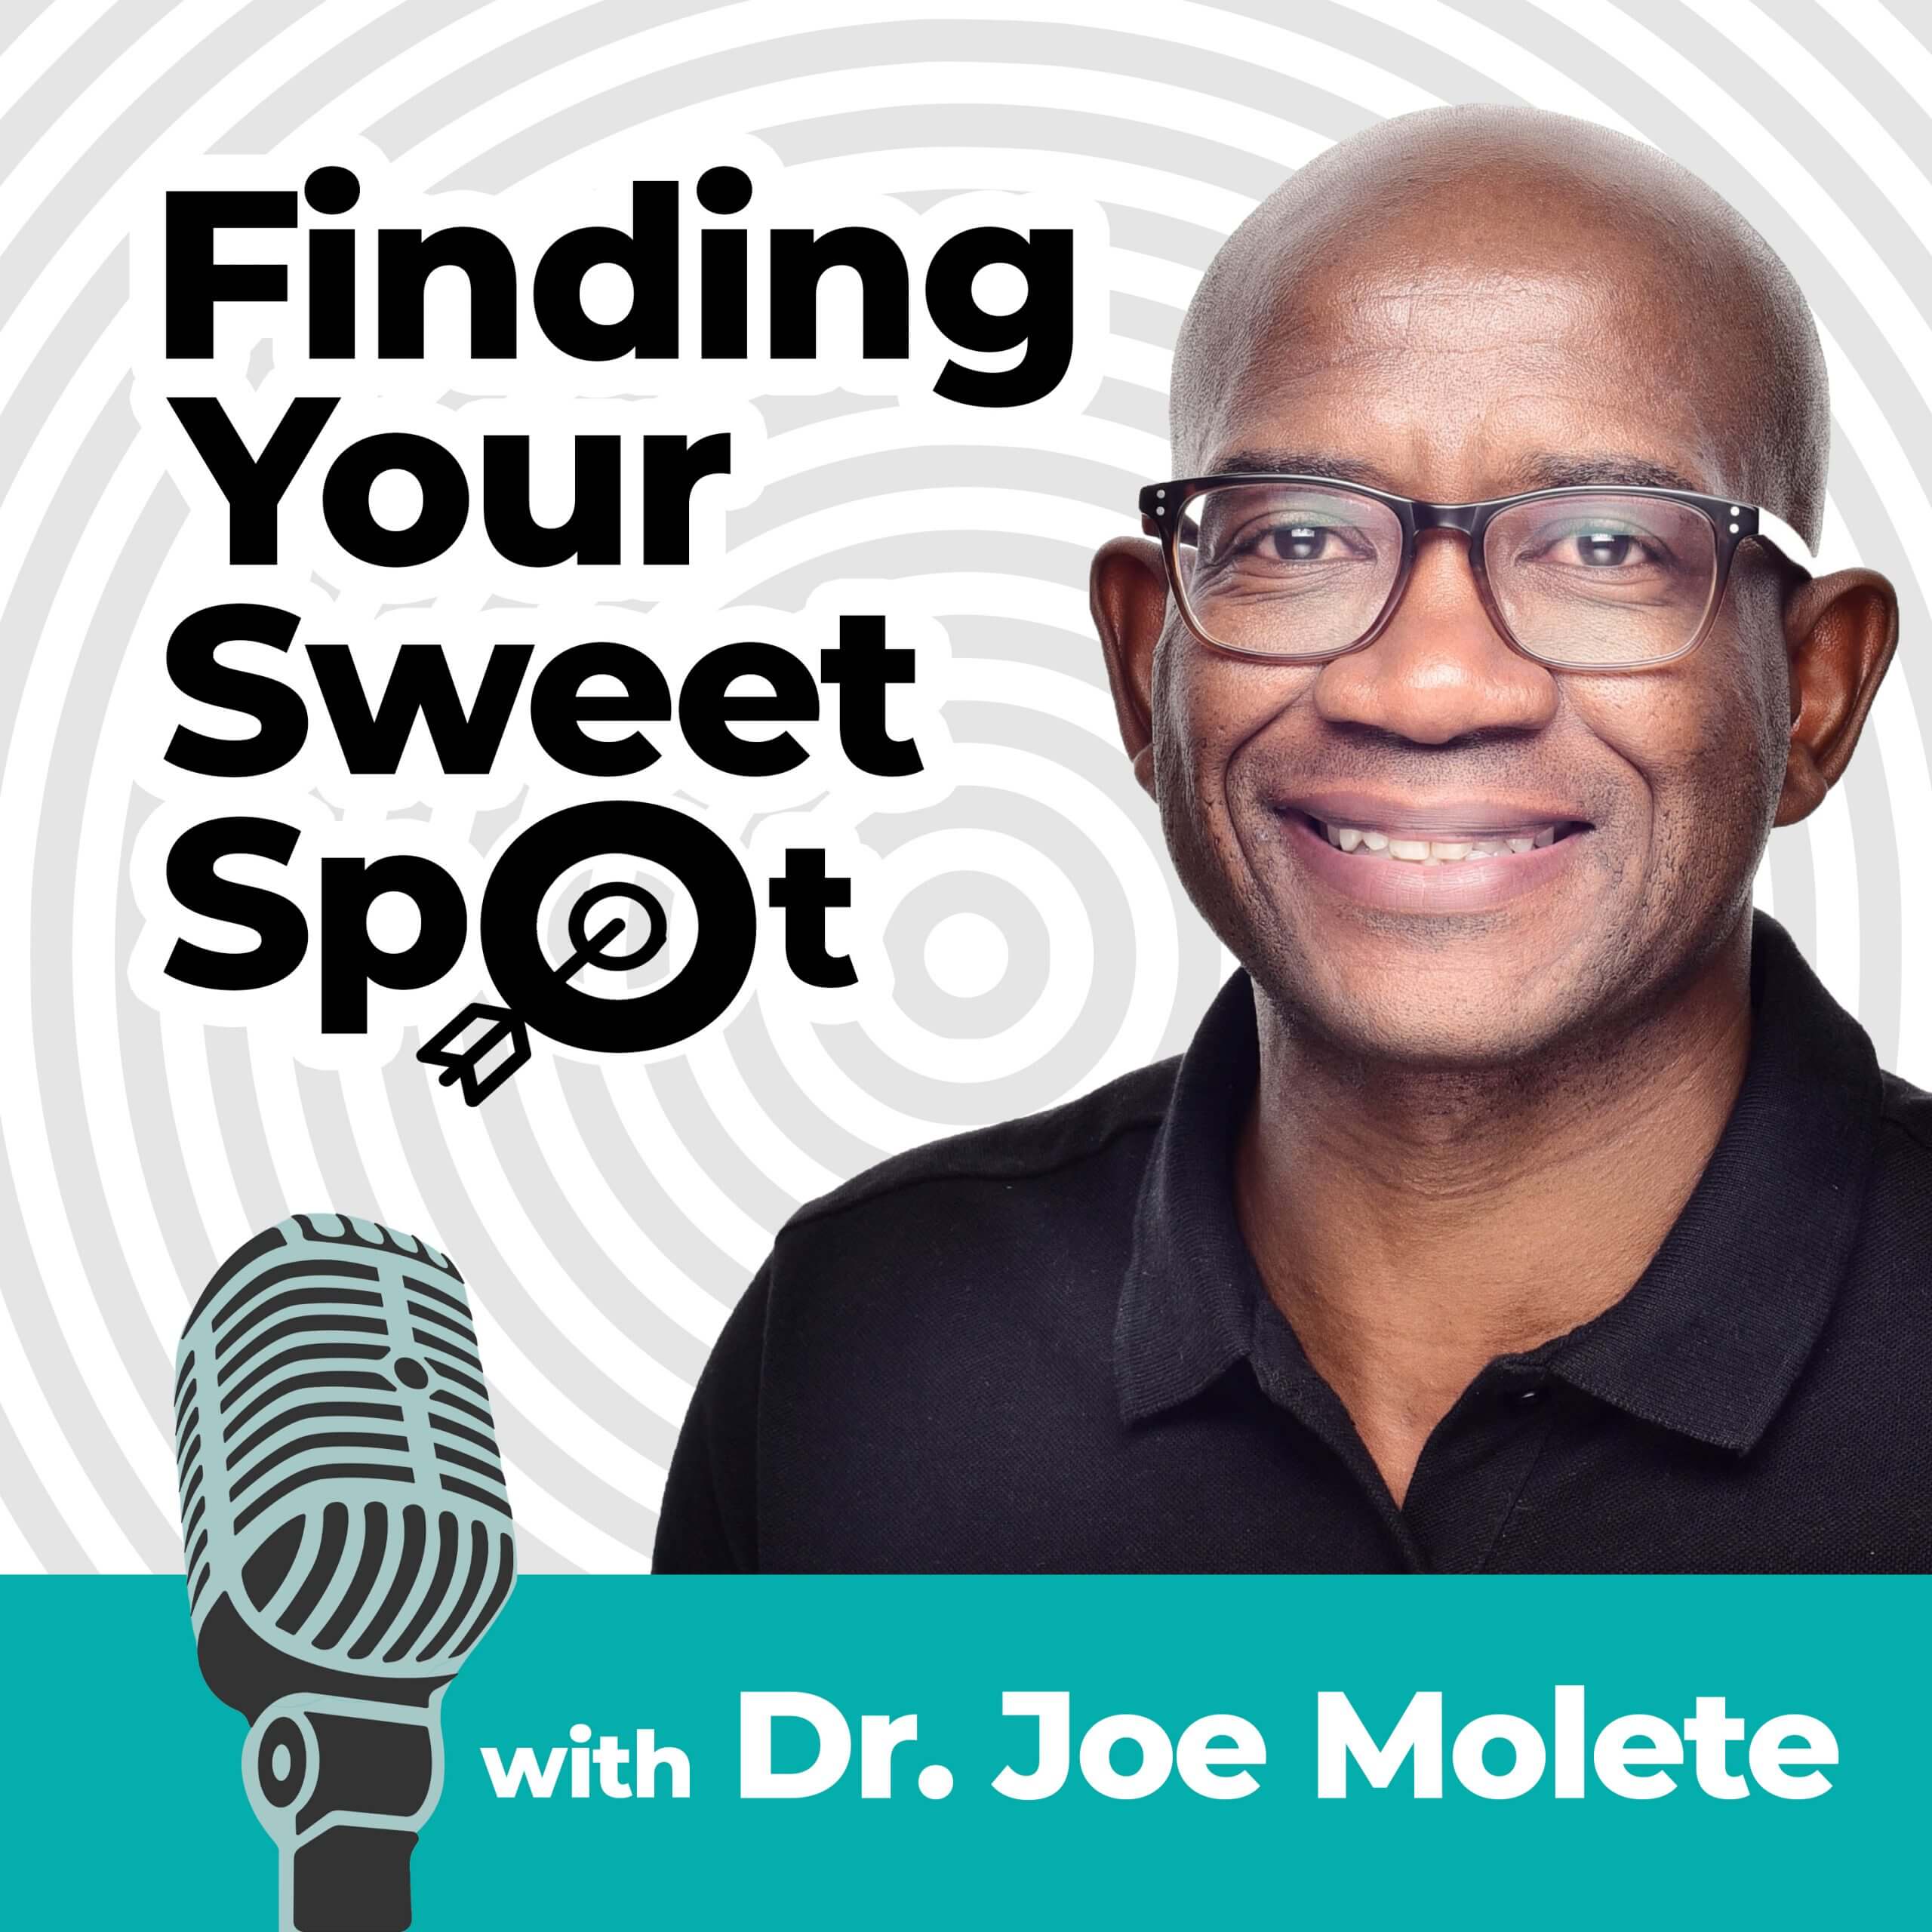 Finding Your Sweet Spot